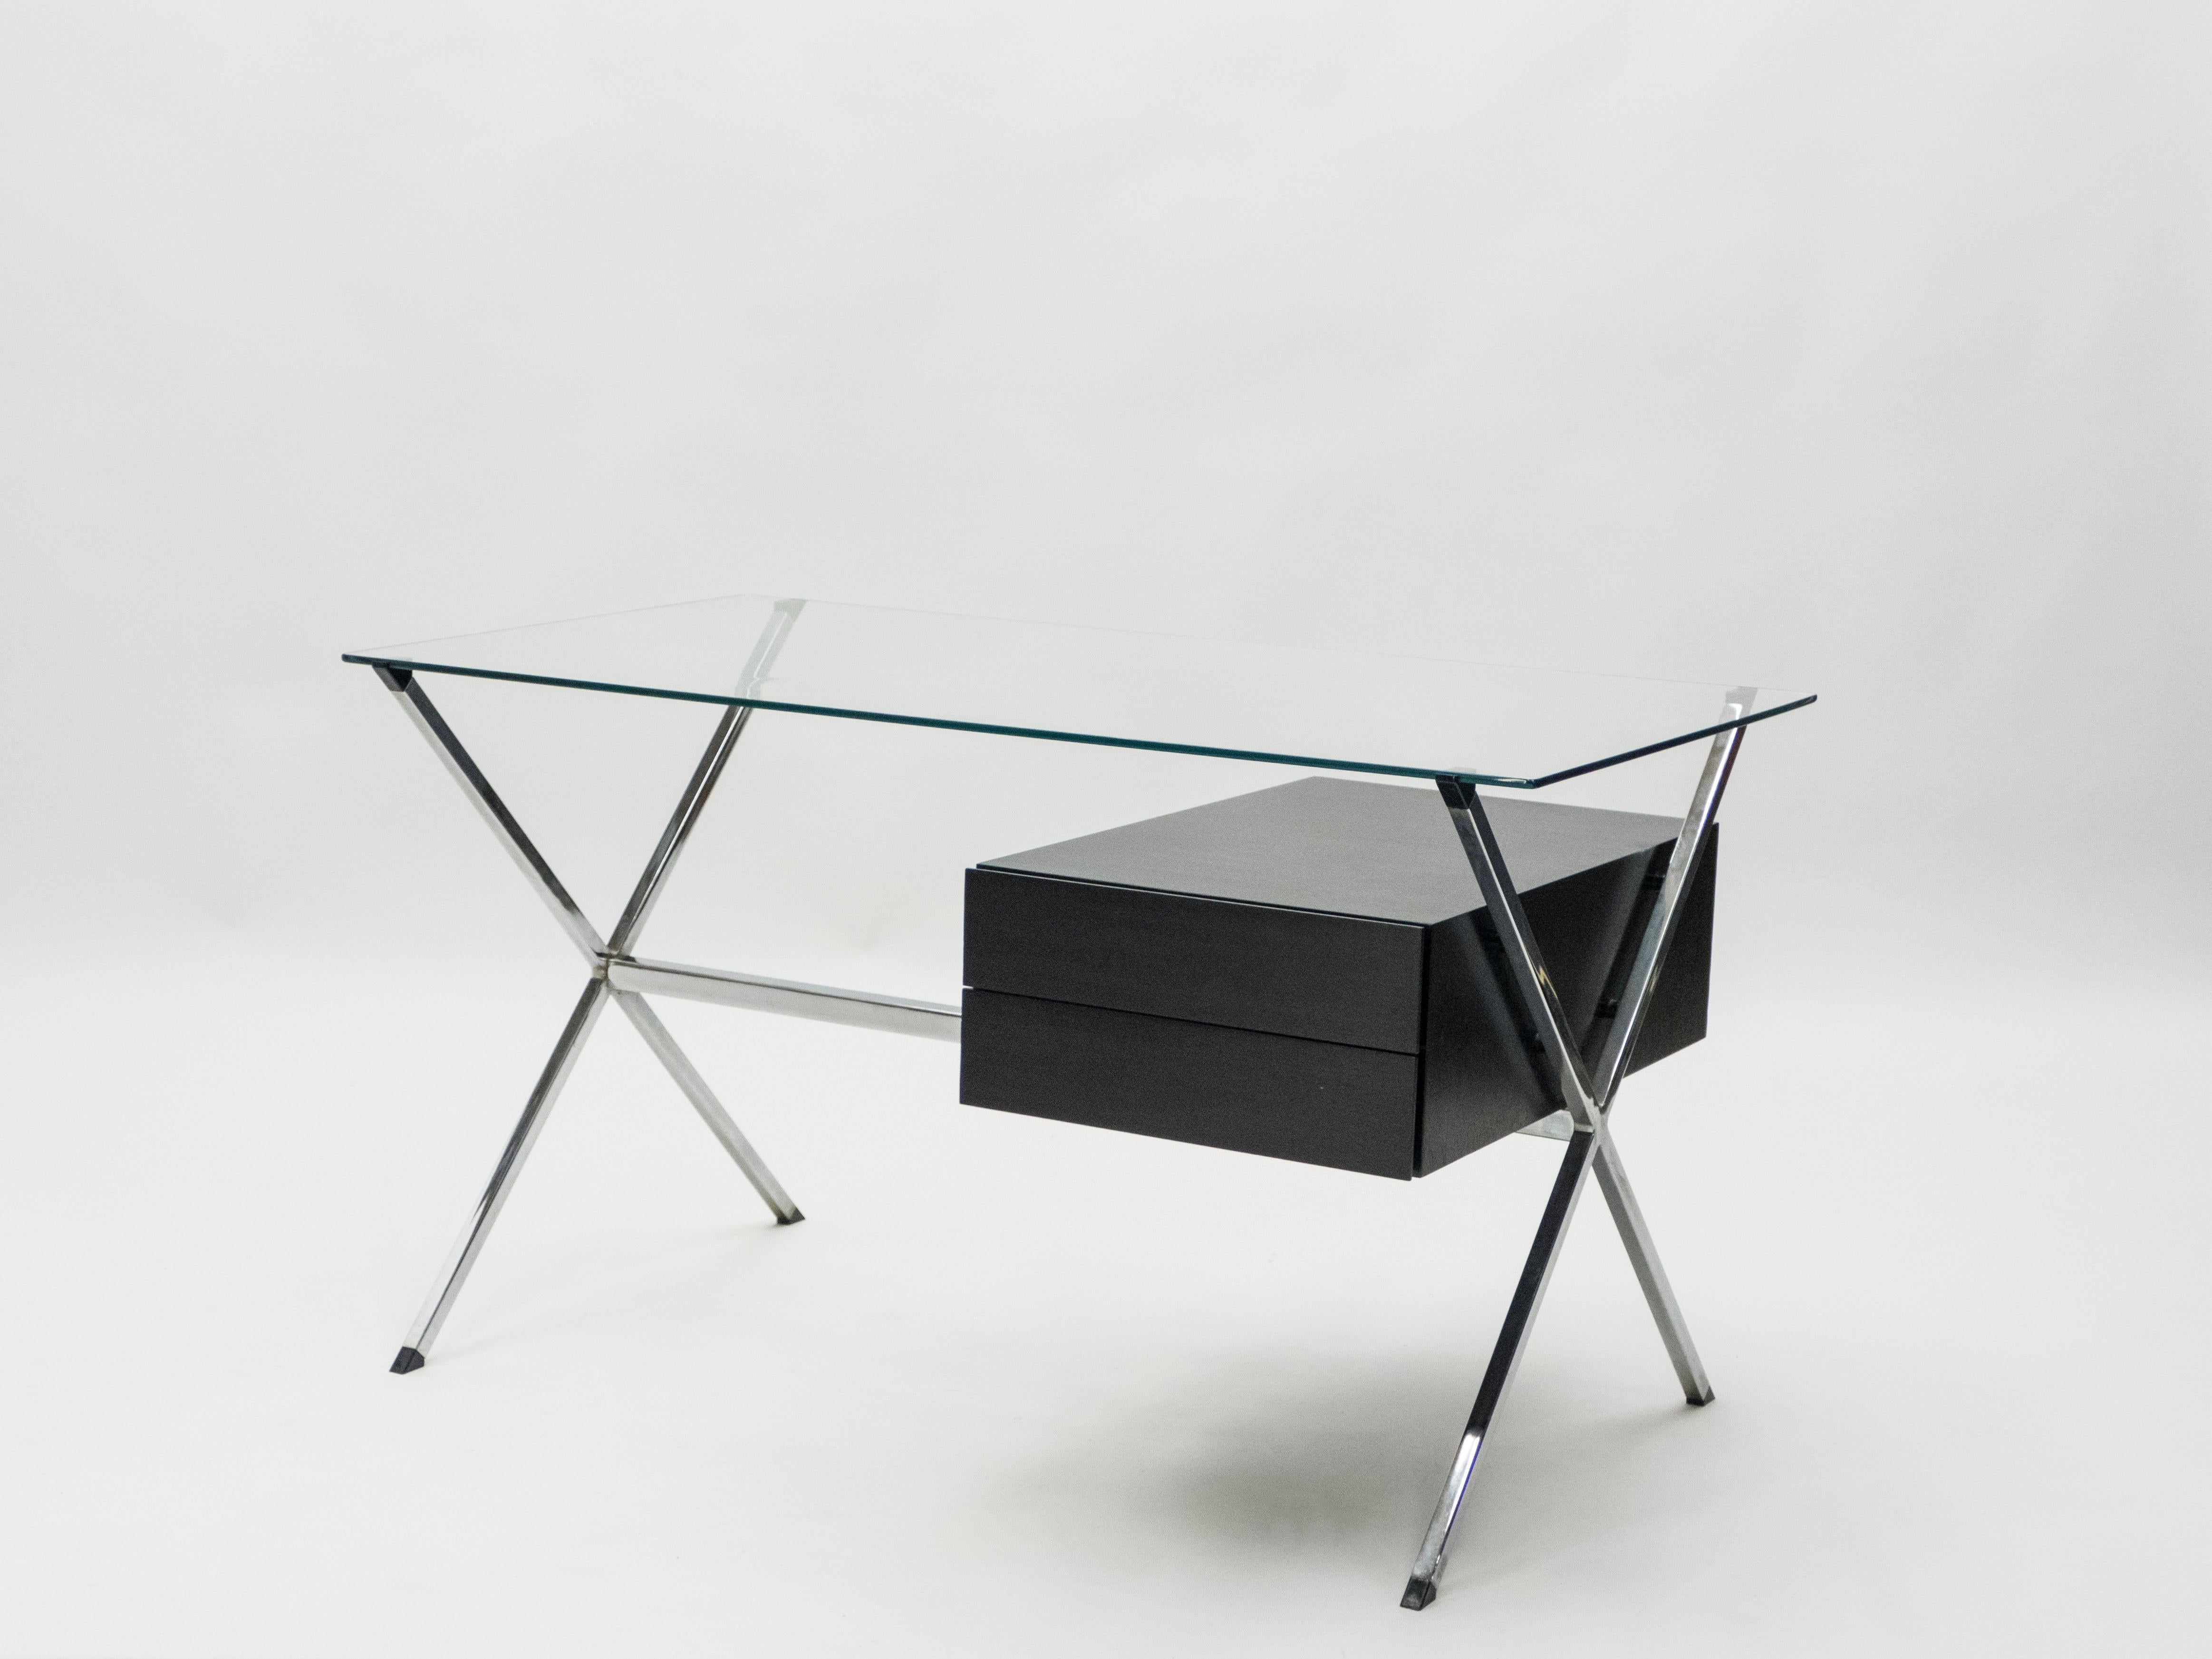 Perfect Mid-Century Modern proportions, designed by Franco Albini for Knoll International in 1949, this desk model 1928 has a decidedly vintage mood. The desk features Albini’s design and minimalistic feel, simple and elegant form with this slight